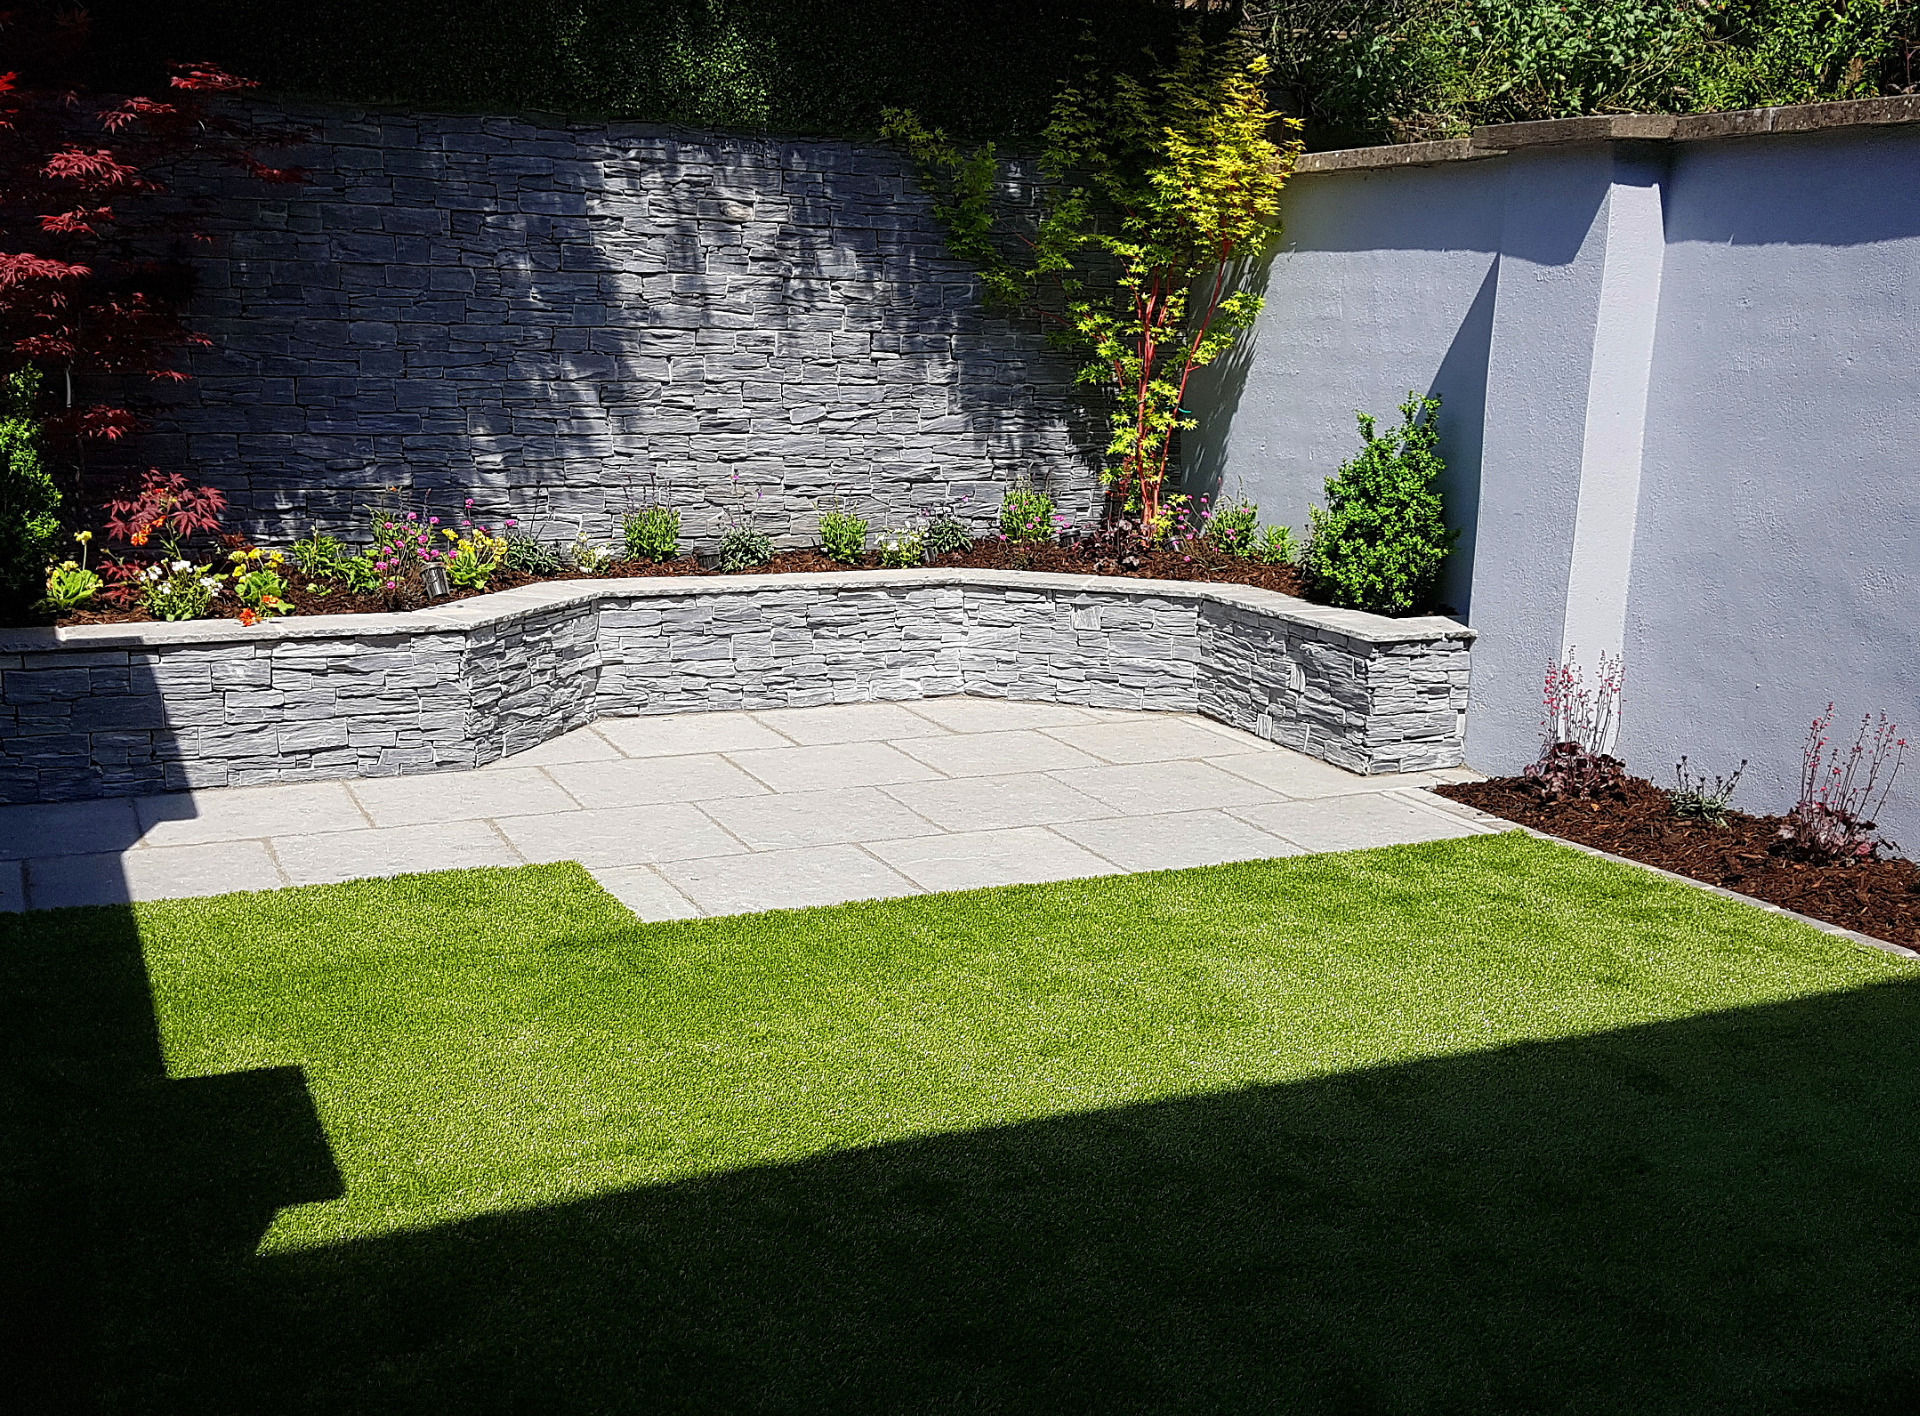 Natural Stone Cladding used on a Raised Planter Bed & Boundary Wall in Rathgar, Dublin 6